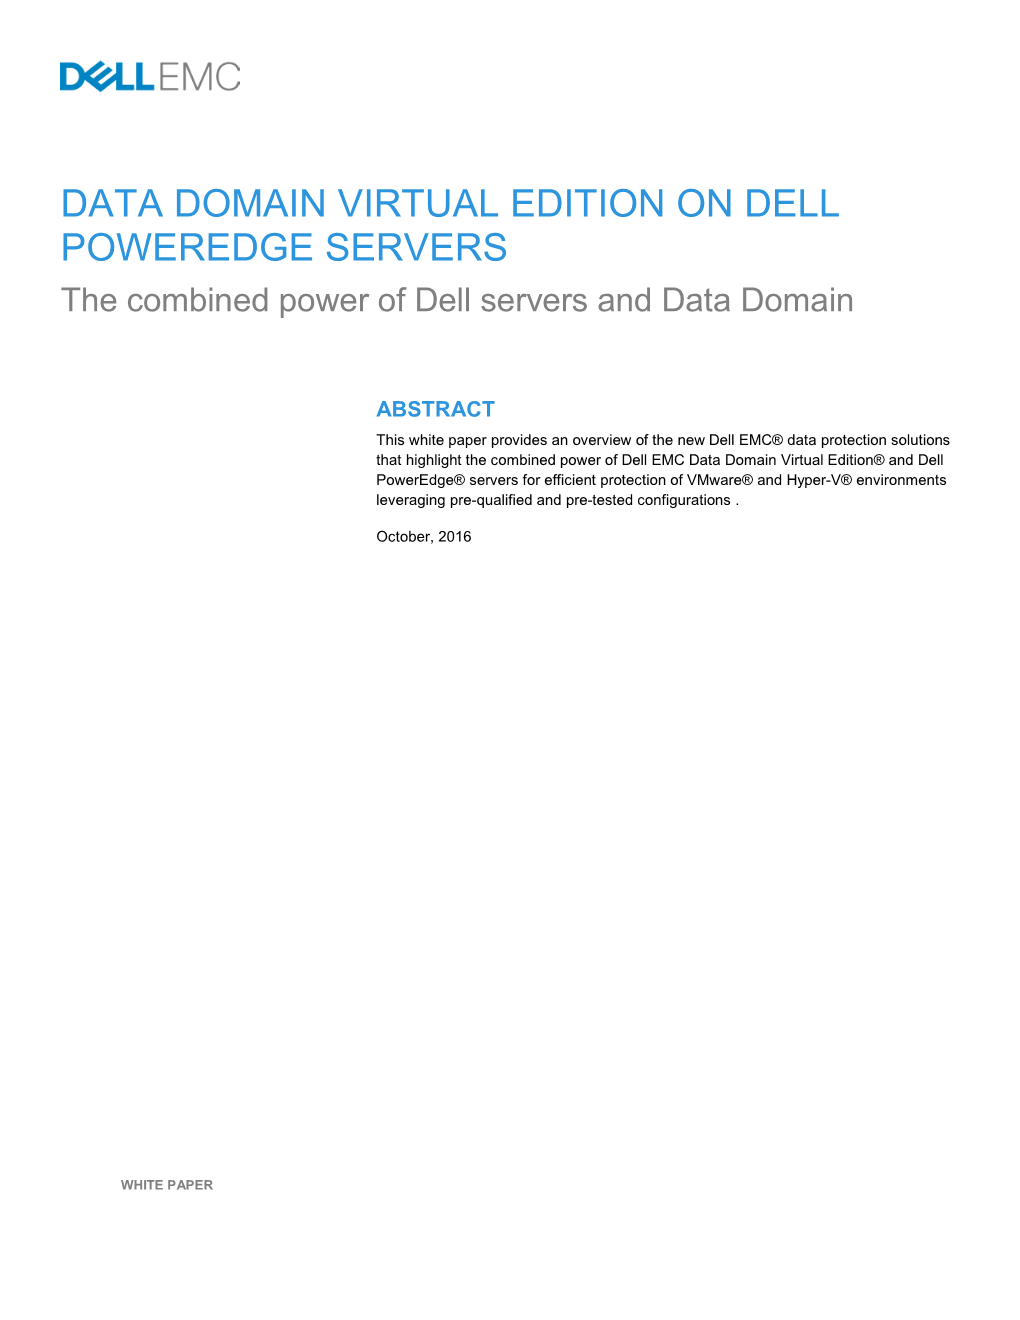 DATA DOMAIN VIRTUAL EDITION on DELL POWEREDGE SERVERS the Combined Power of Dell Servers and Data Domain